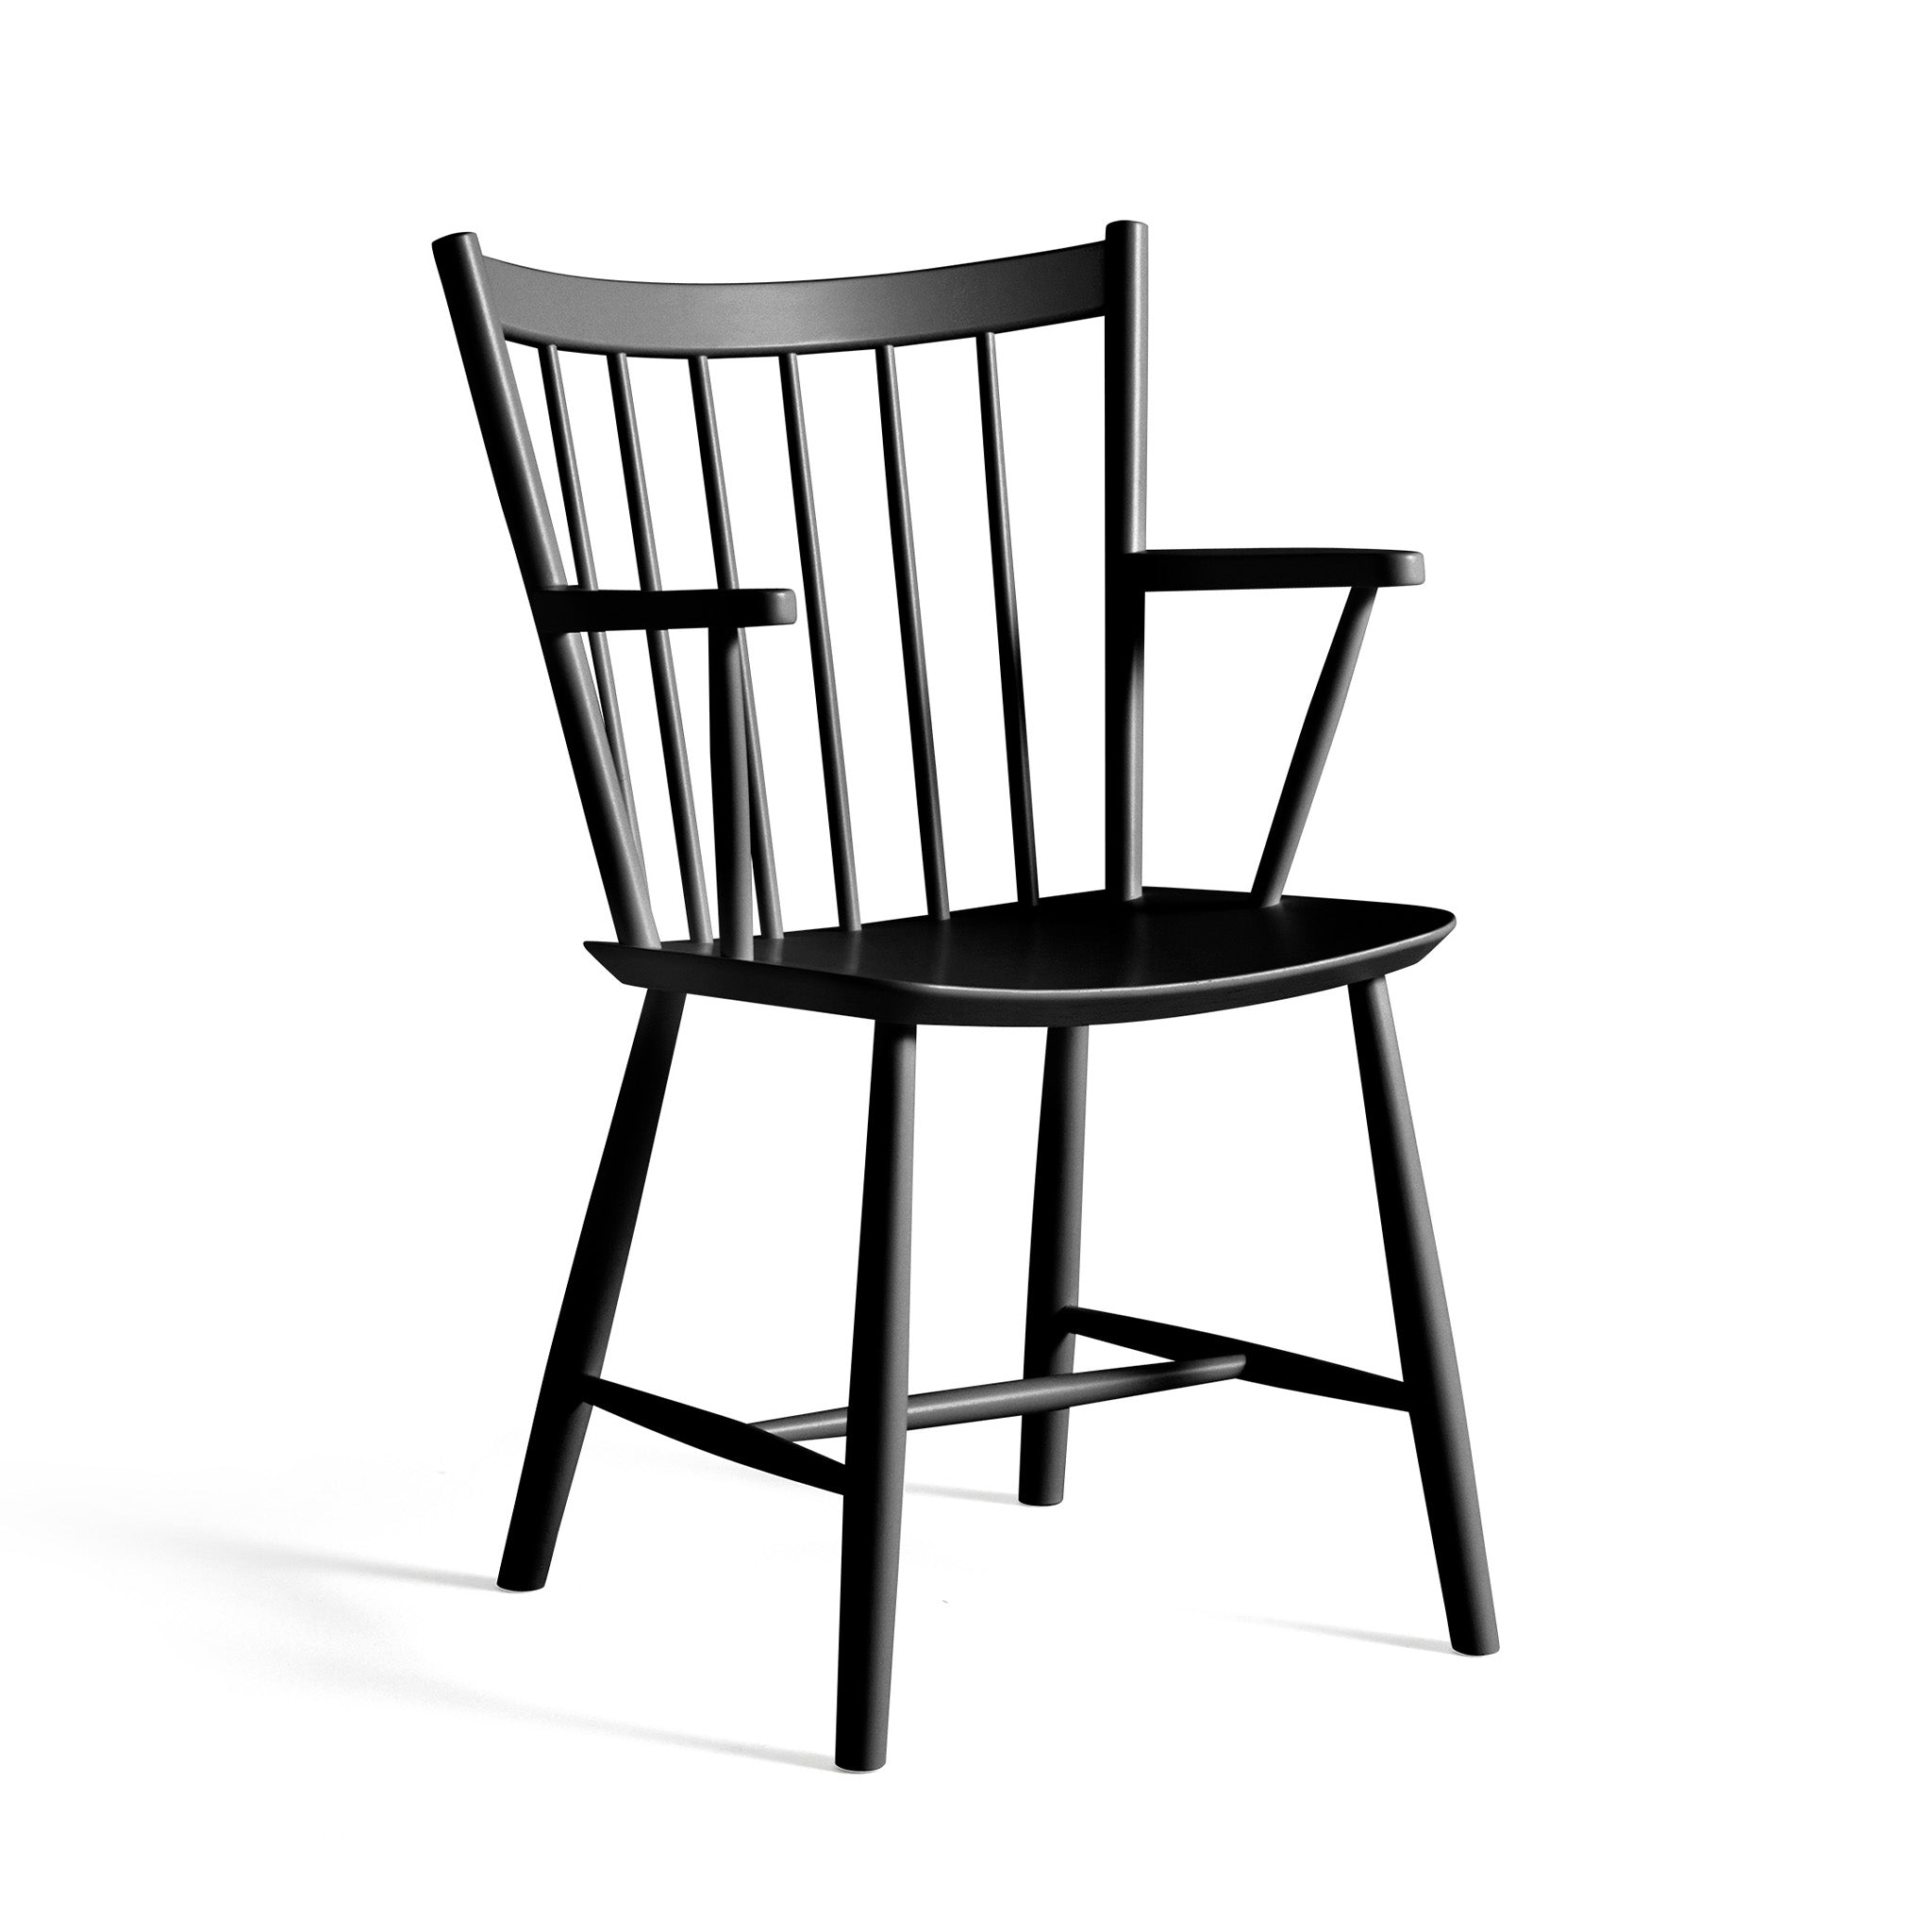 J42 Chair By Børge Mogensen For Hay